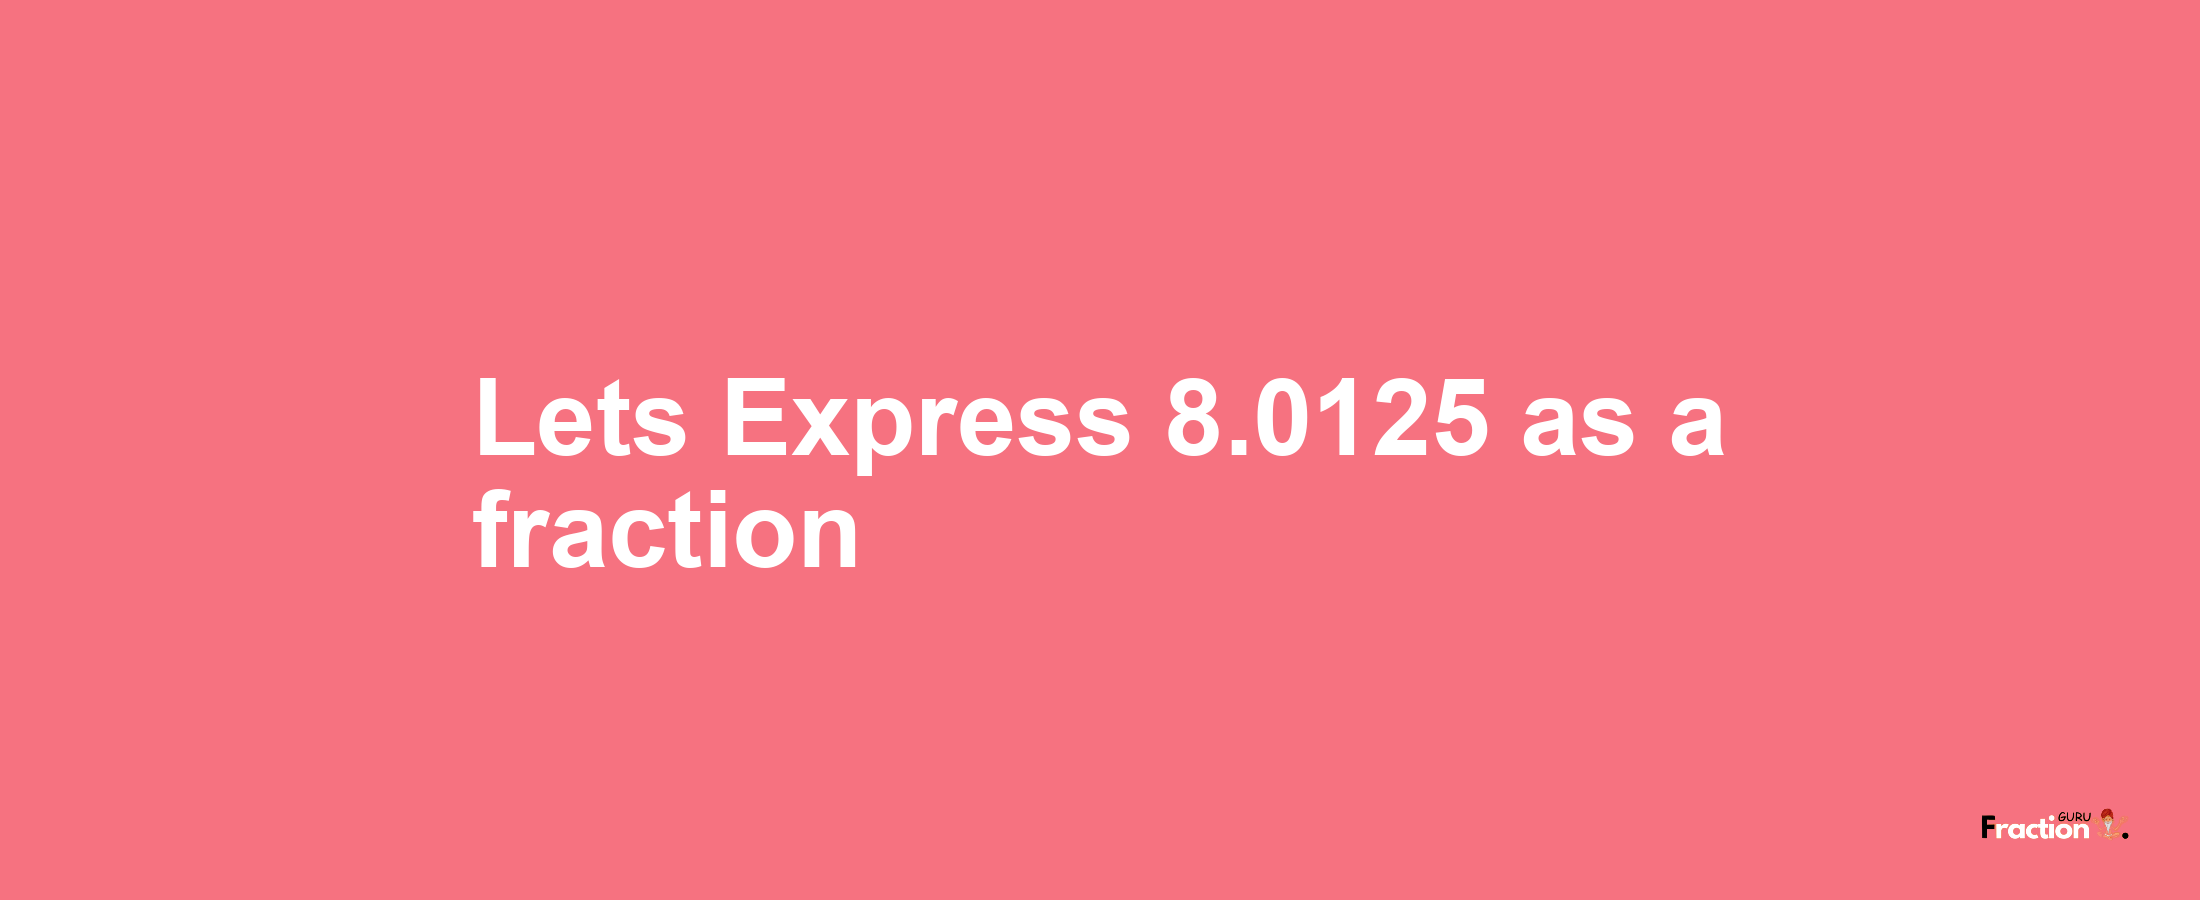 Lets Express 8.0125 as afraction